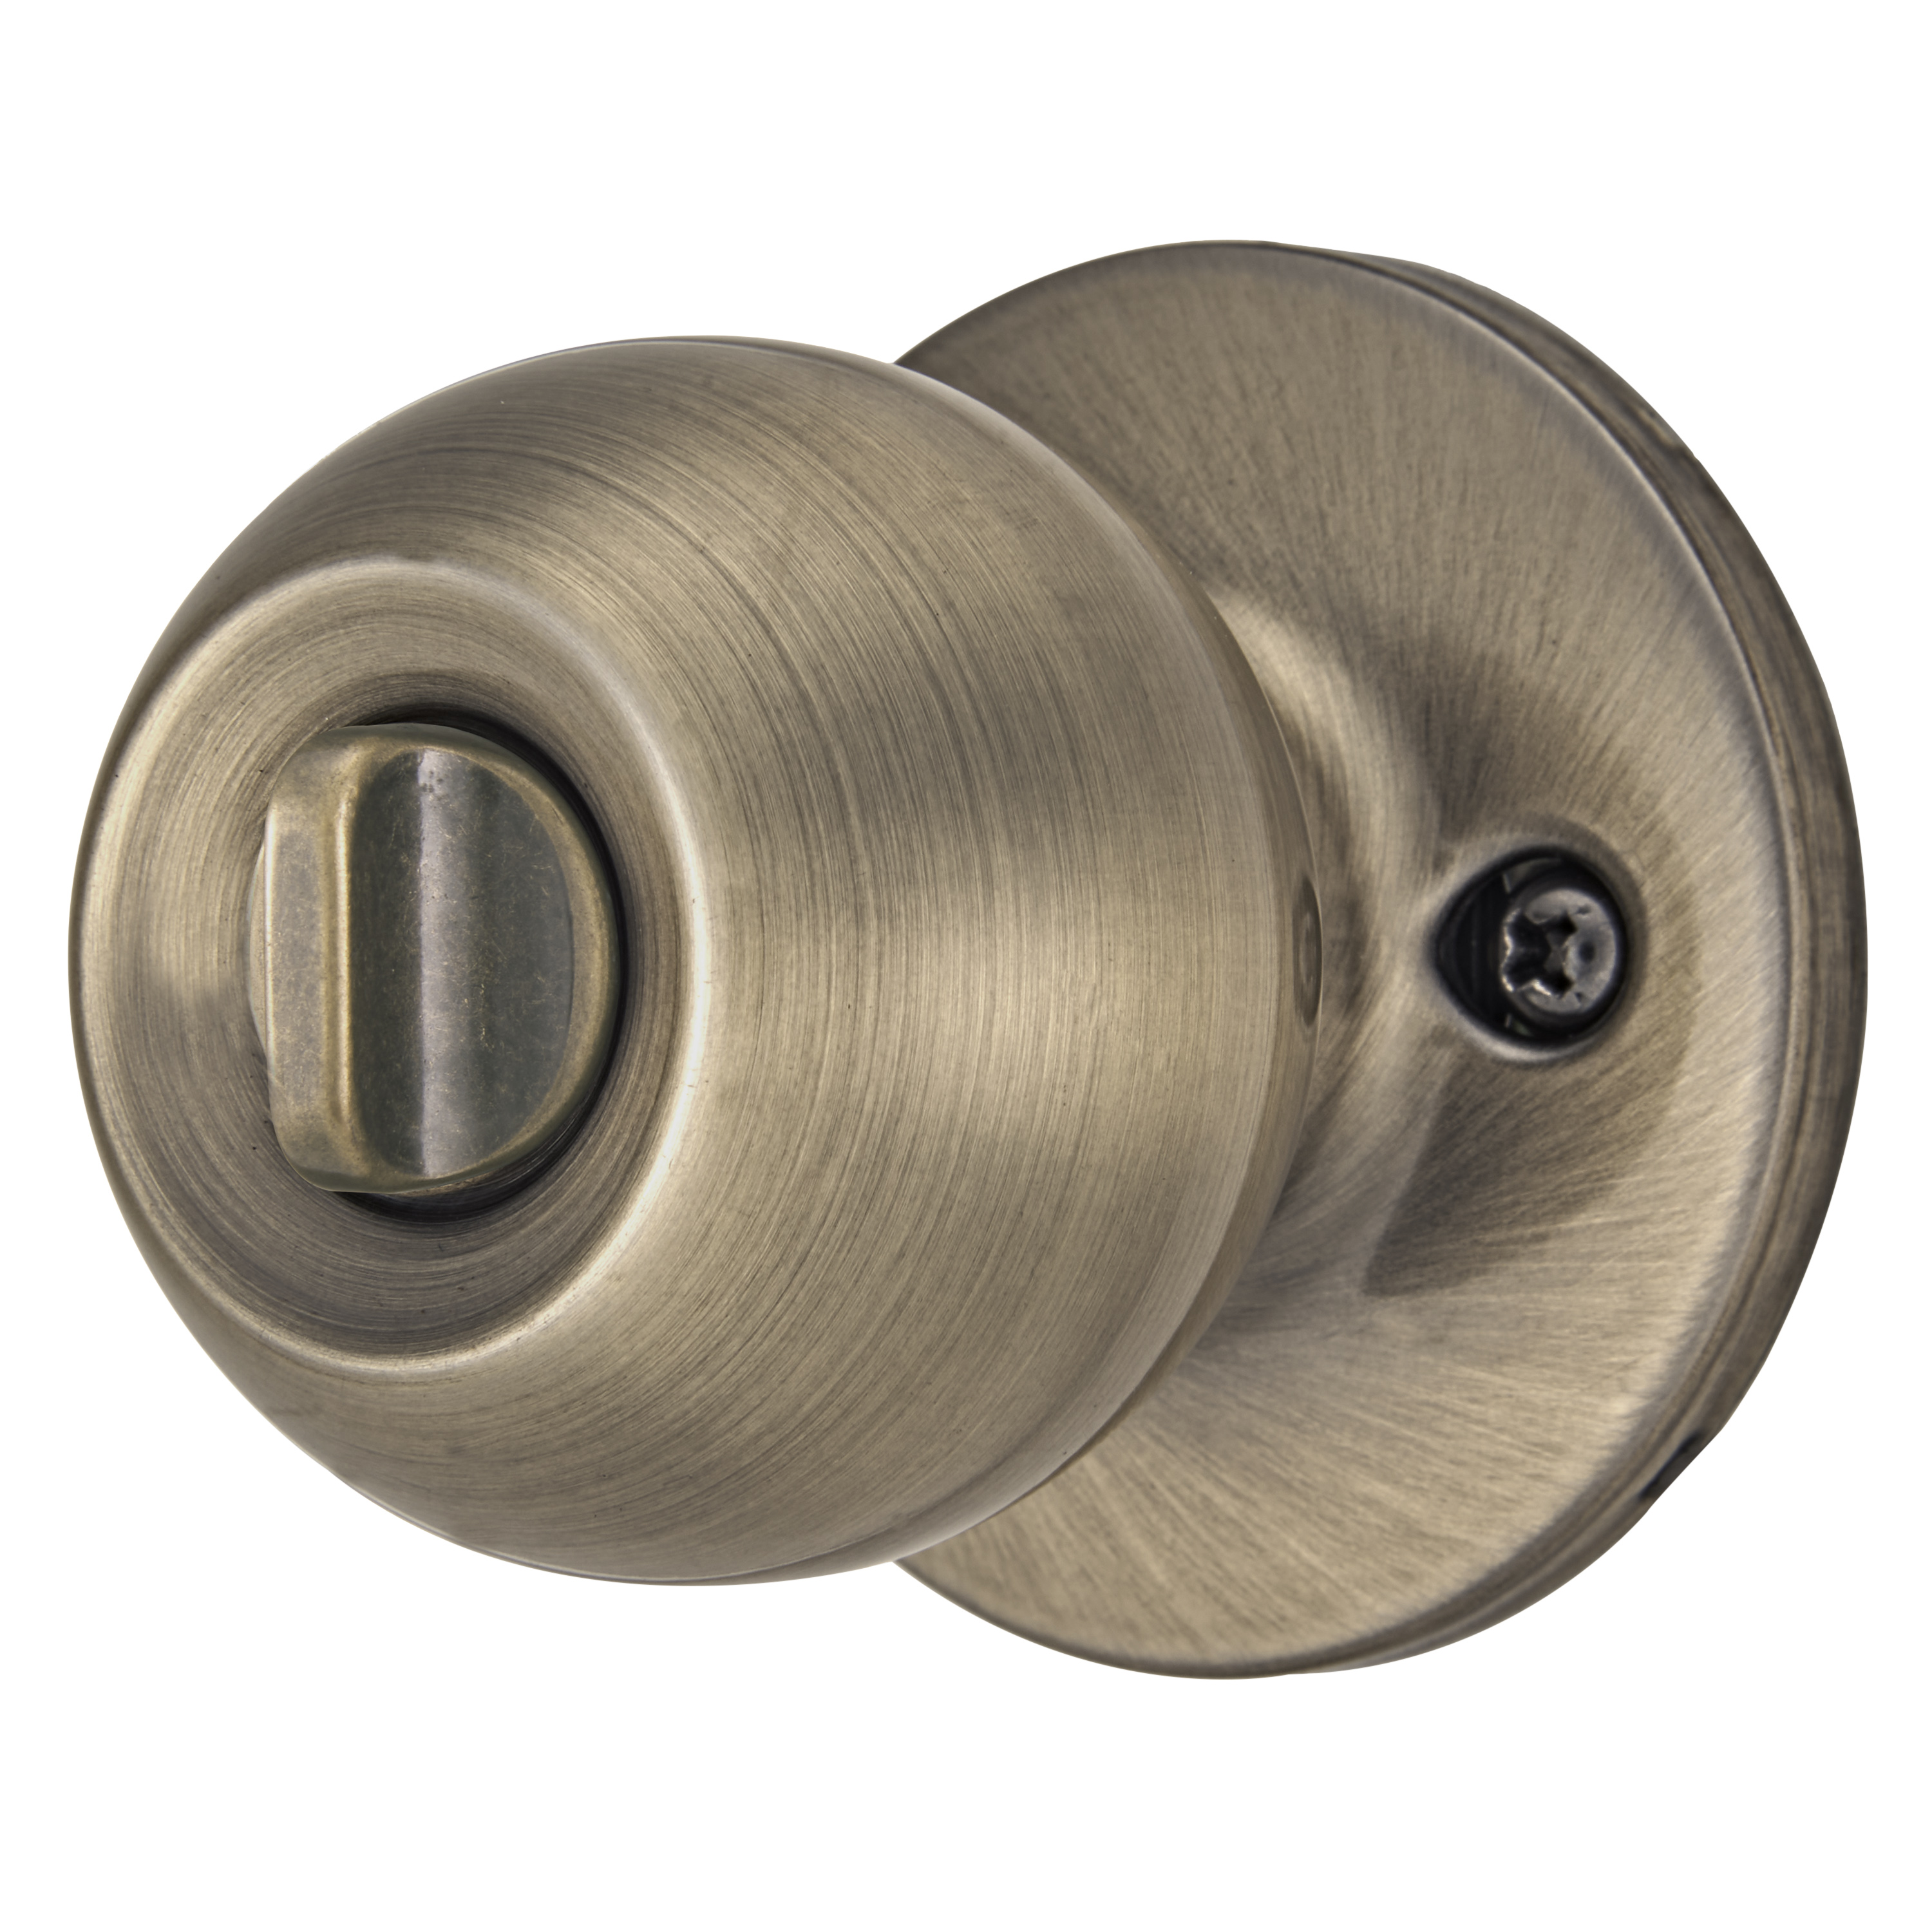 Brinks, Privacy Bed/Bath Ball Doorknob, Antique Brass Finish - image 3 of 8